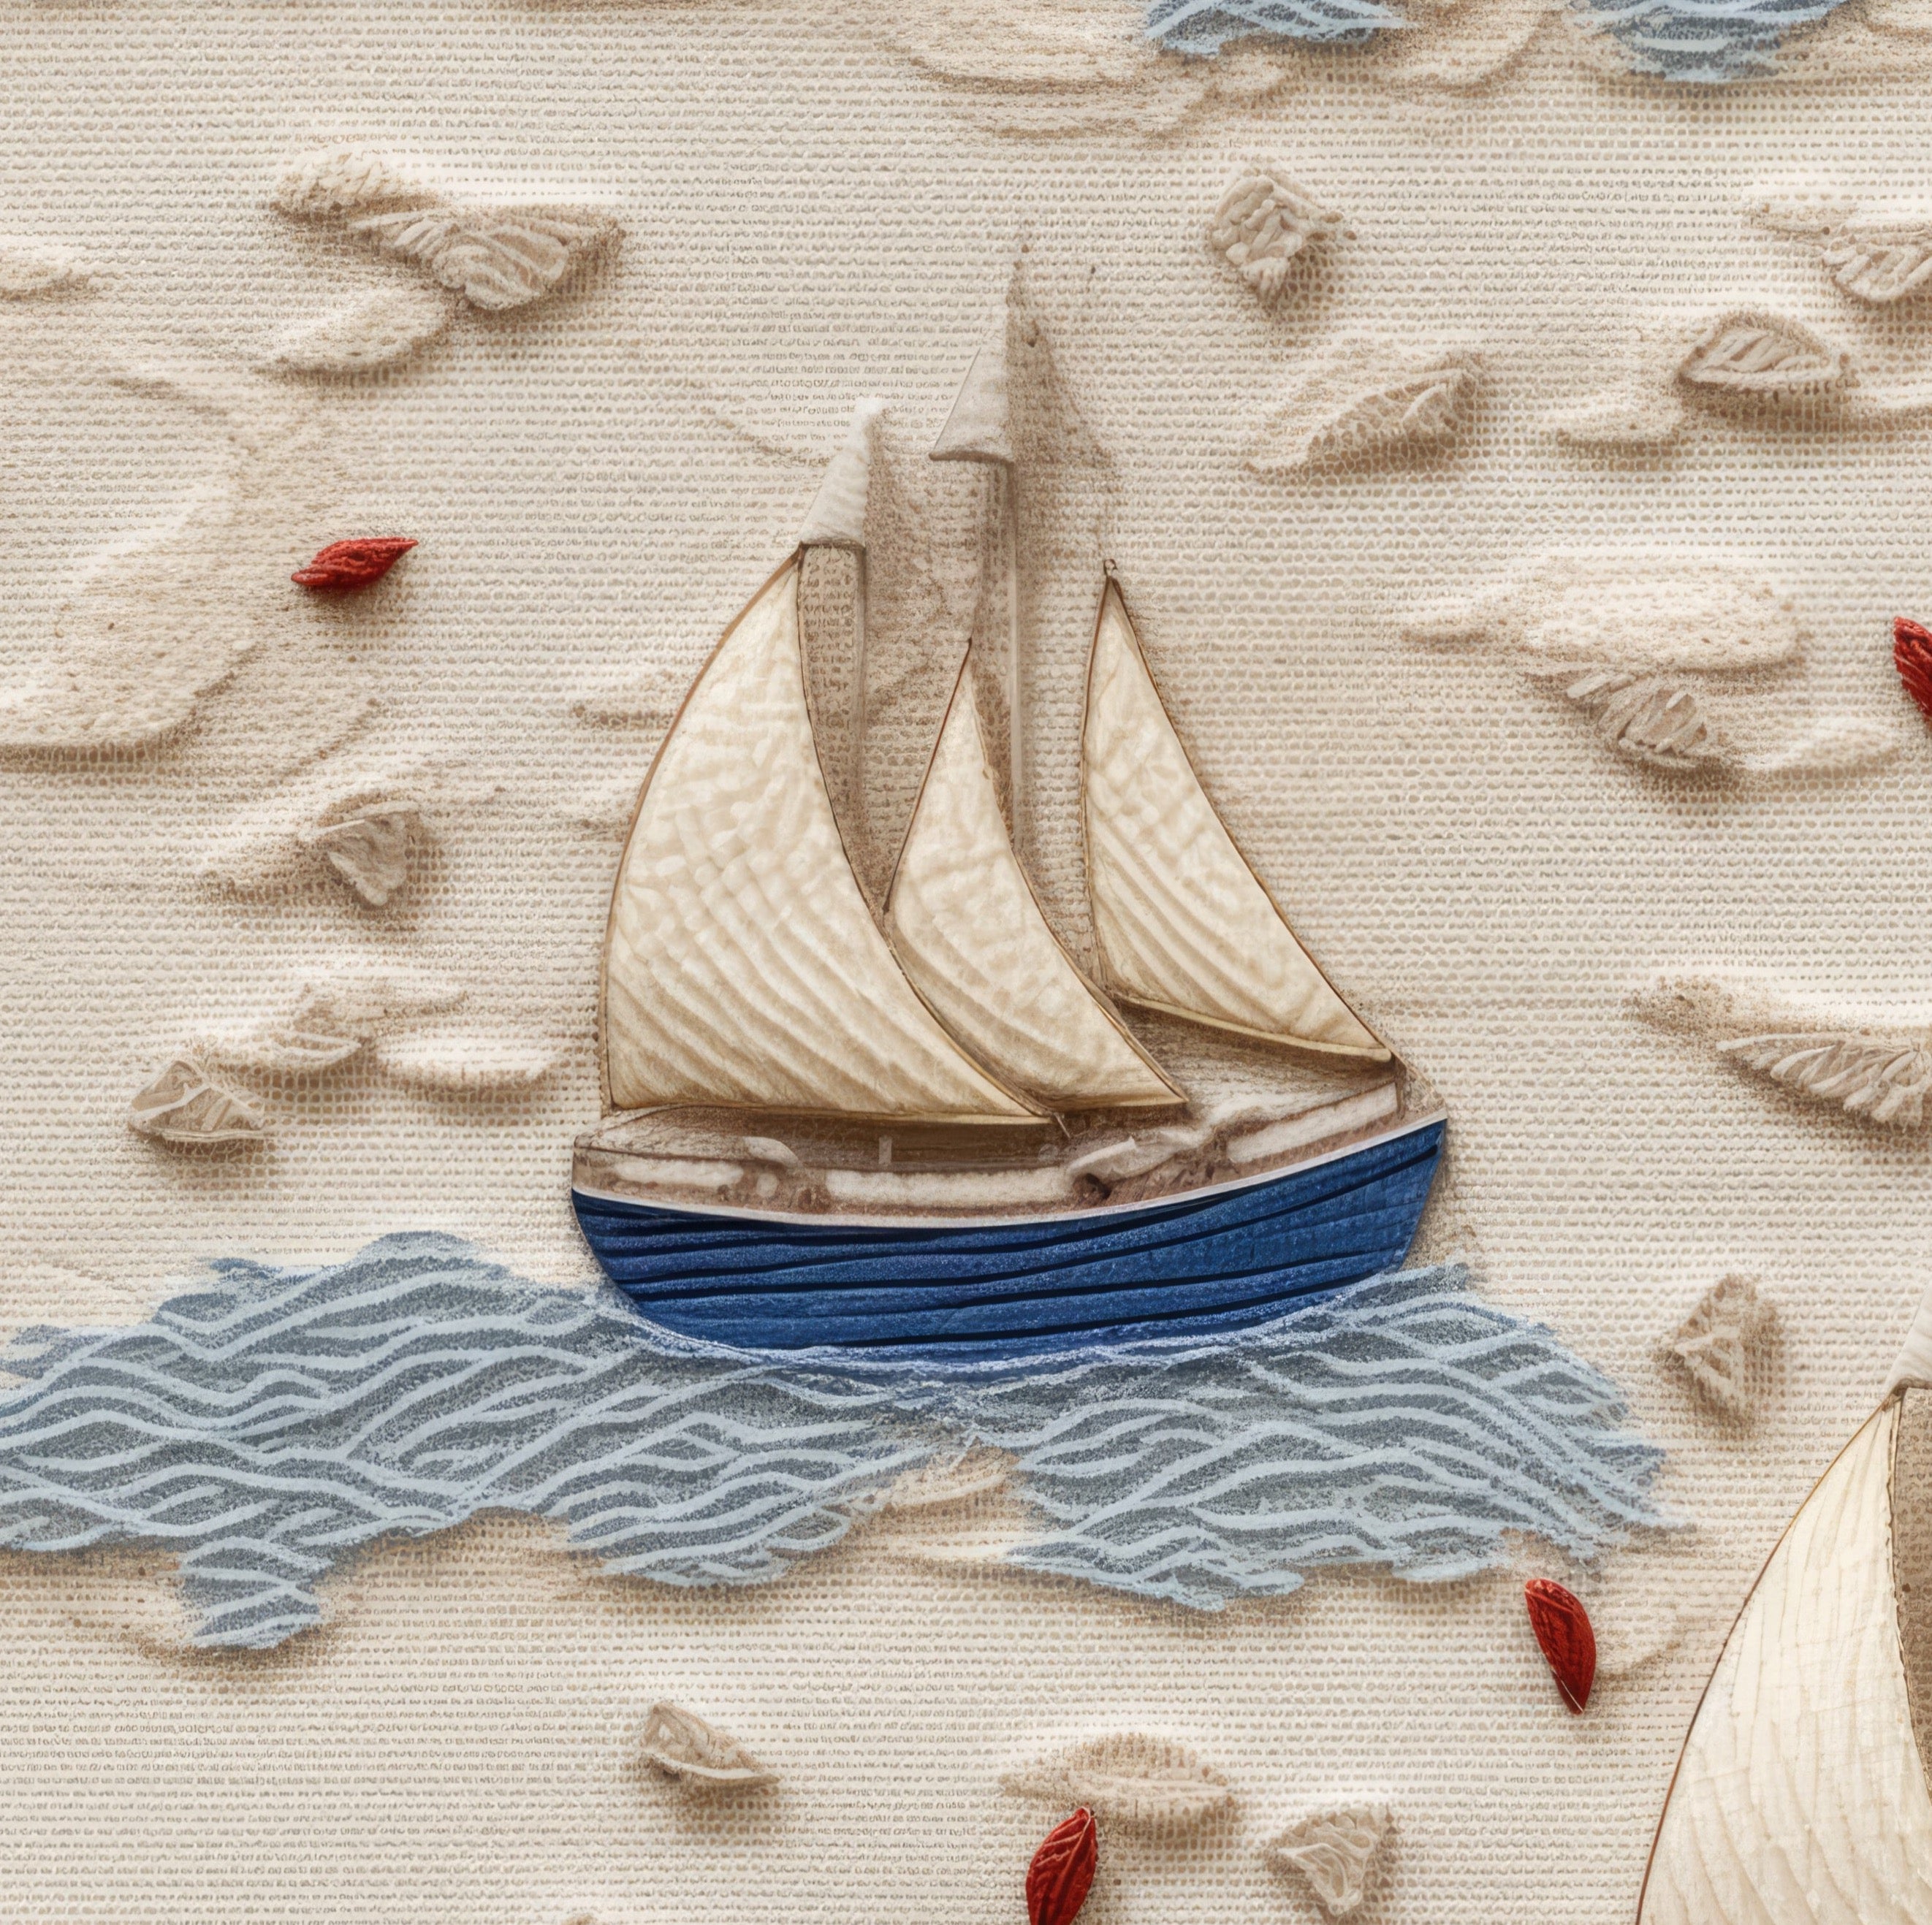 Close-up of Coastal Charm Wallpaper showing detailed sailboats with white sails and blue hulls sailing on textured blue waves, surrounded by small red leaves scattered across a beige backdrop, emphasizing a beach-like feel.